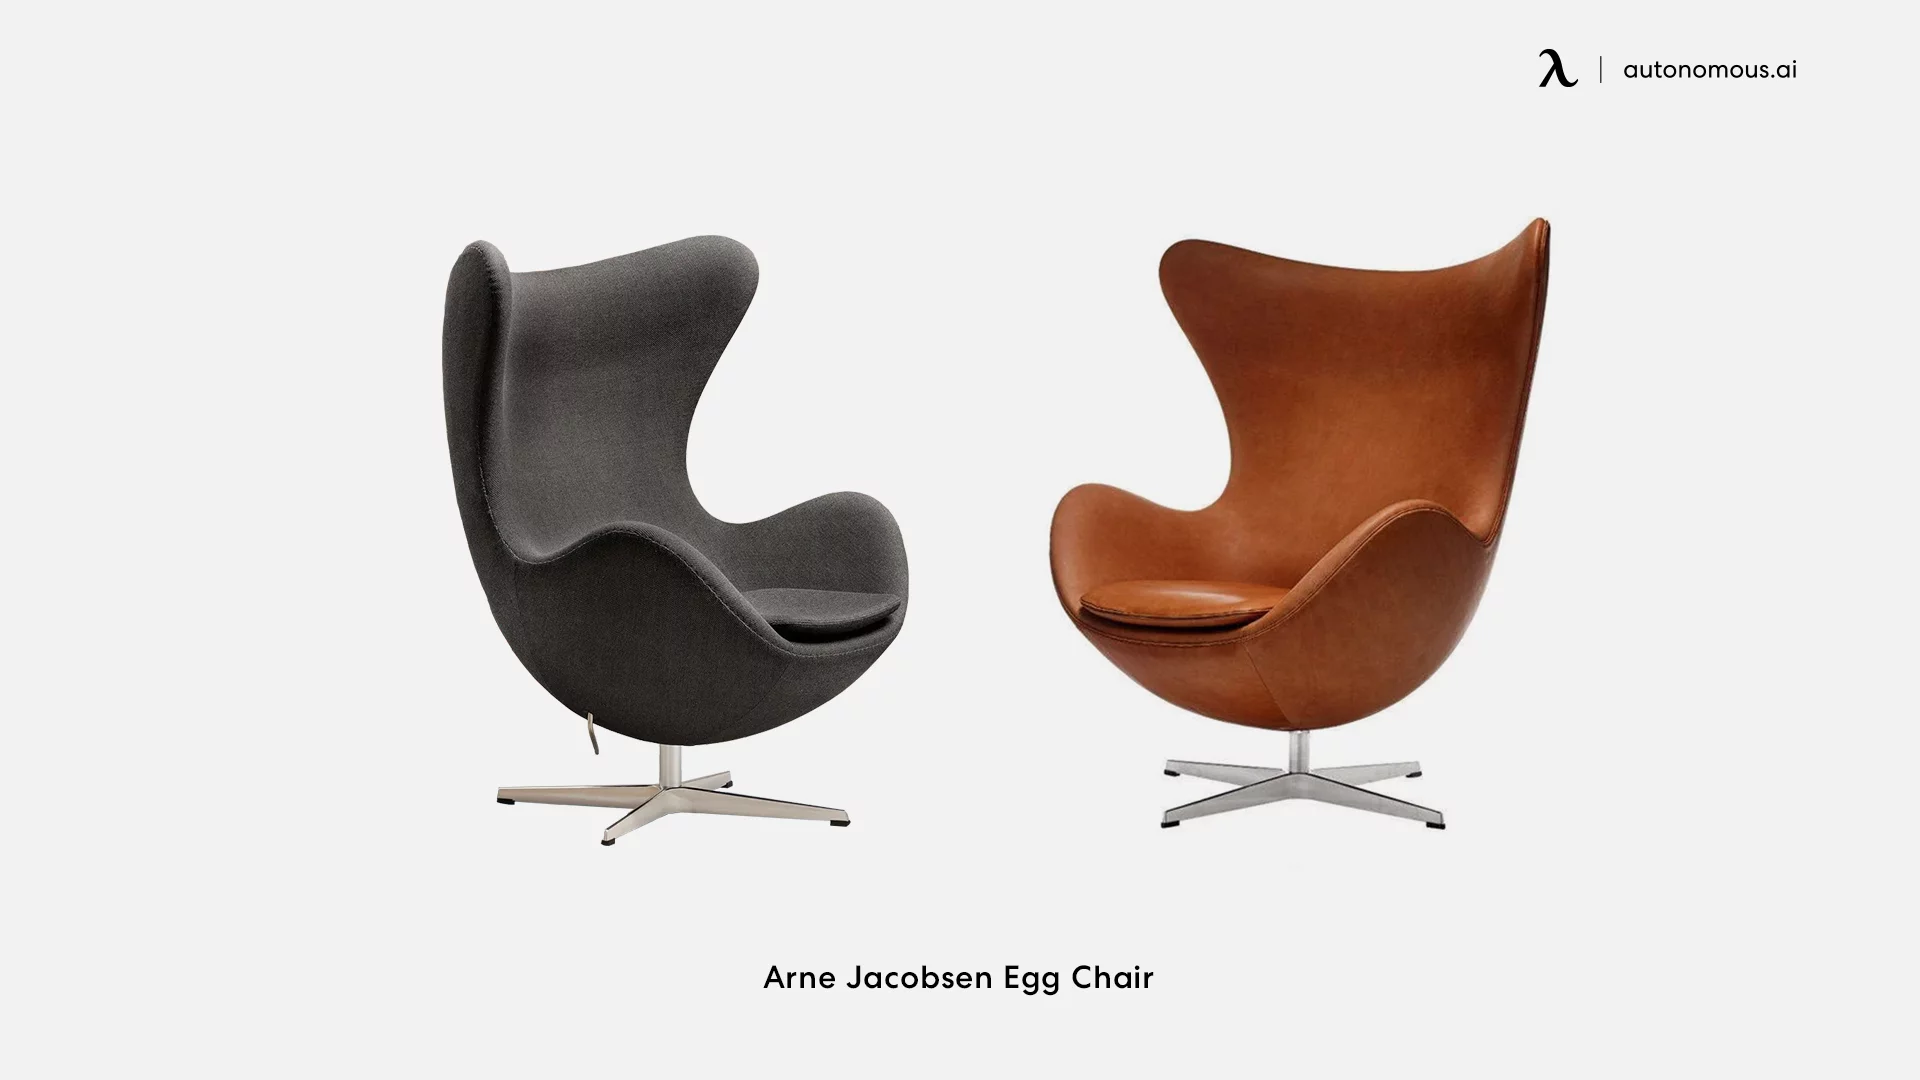 The Egg™ chair by Arne Jacobsen